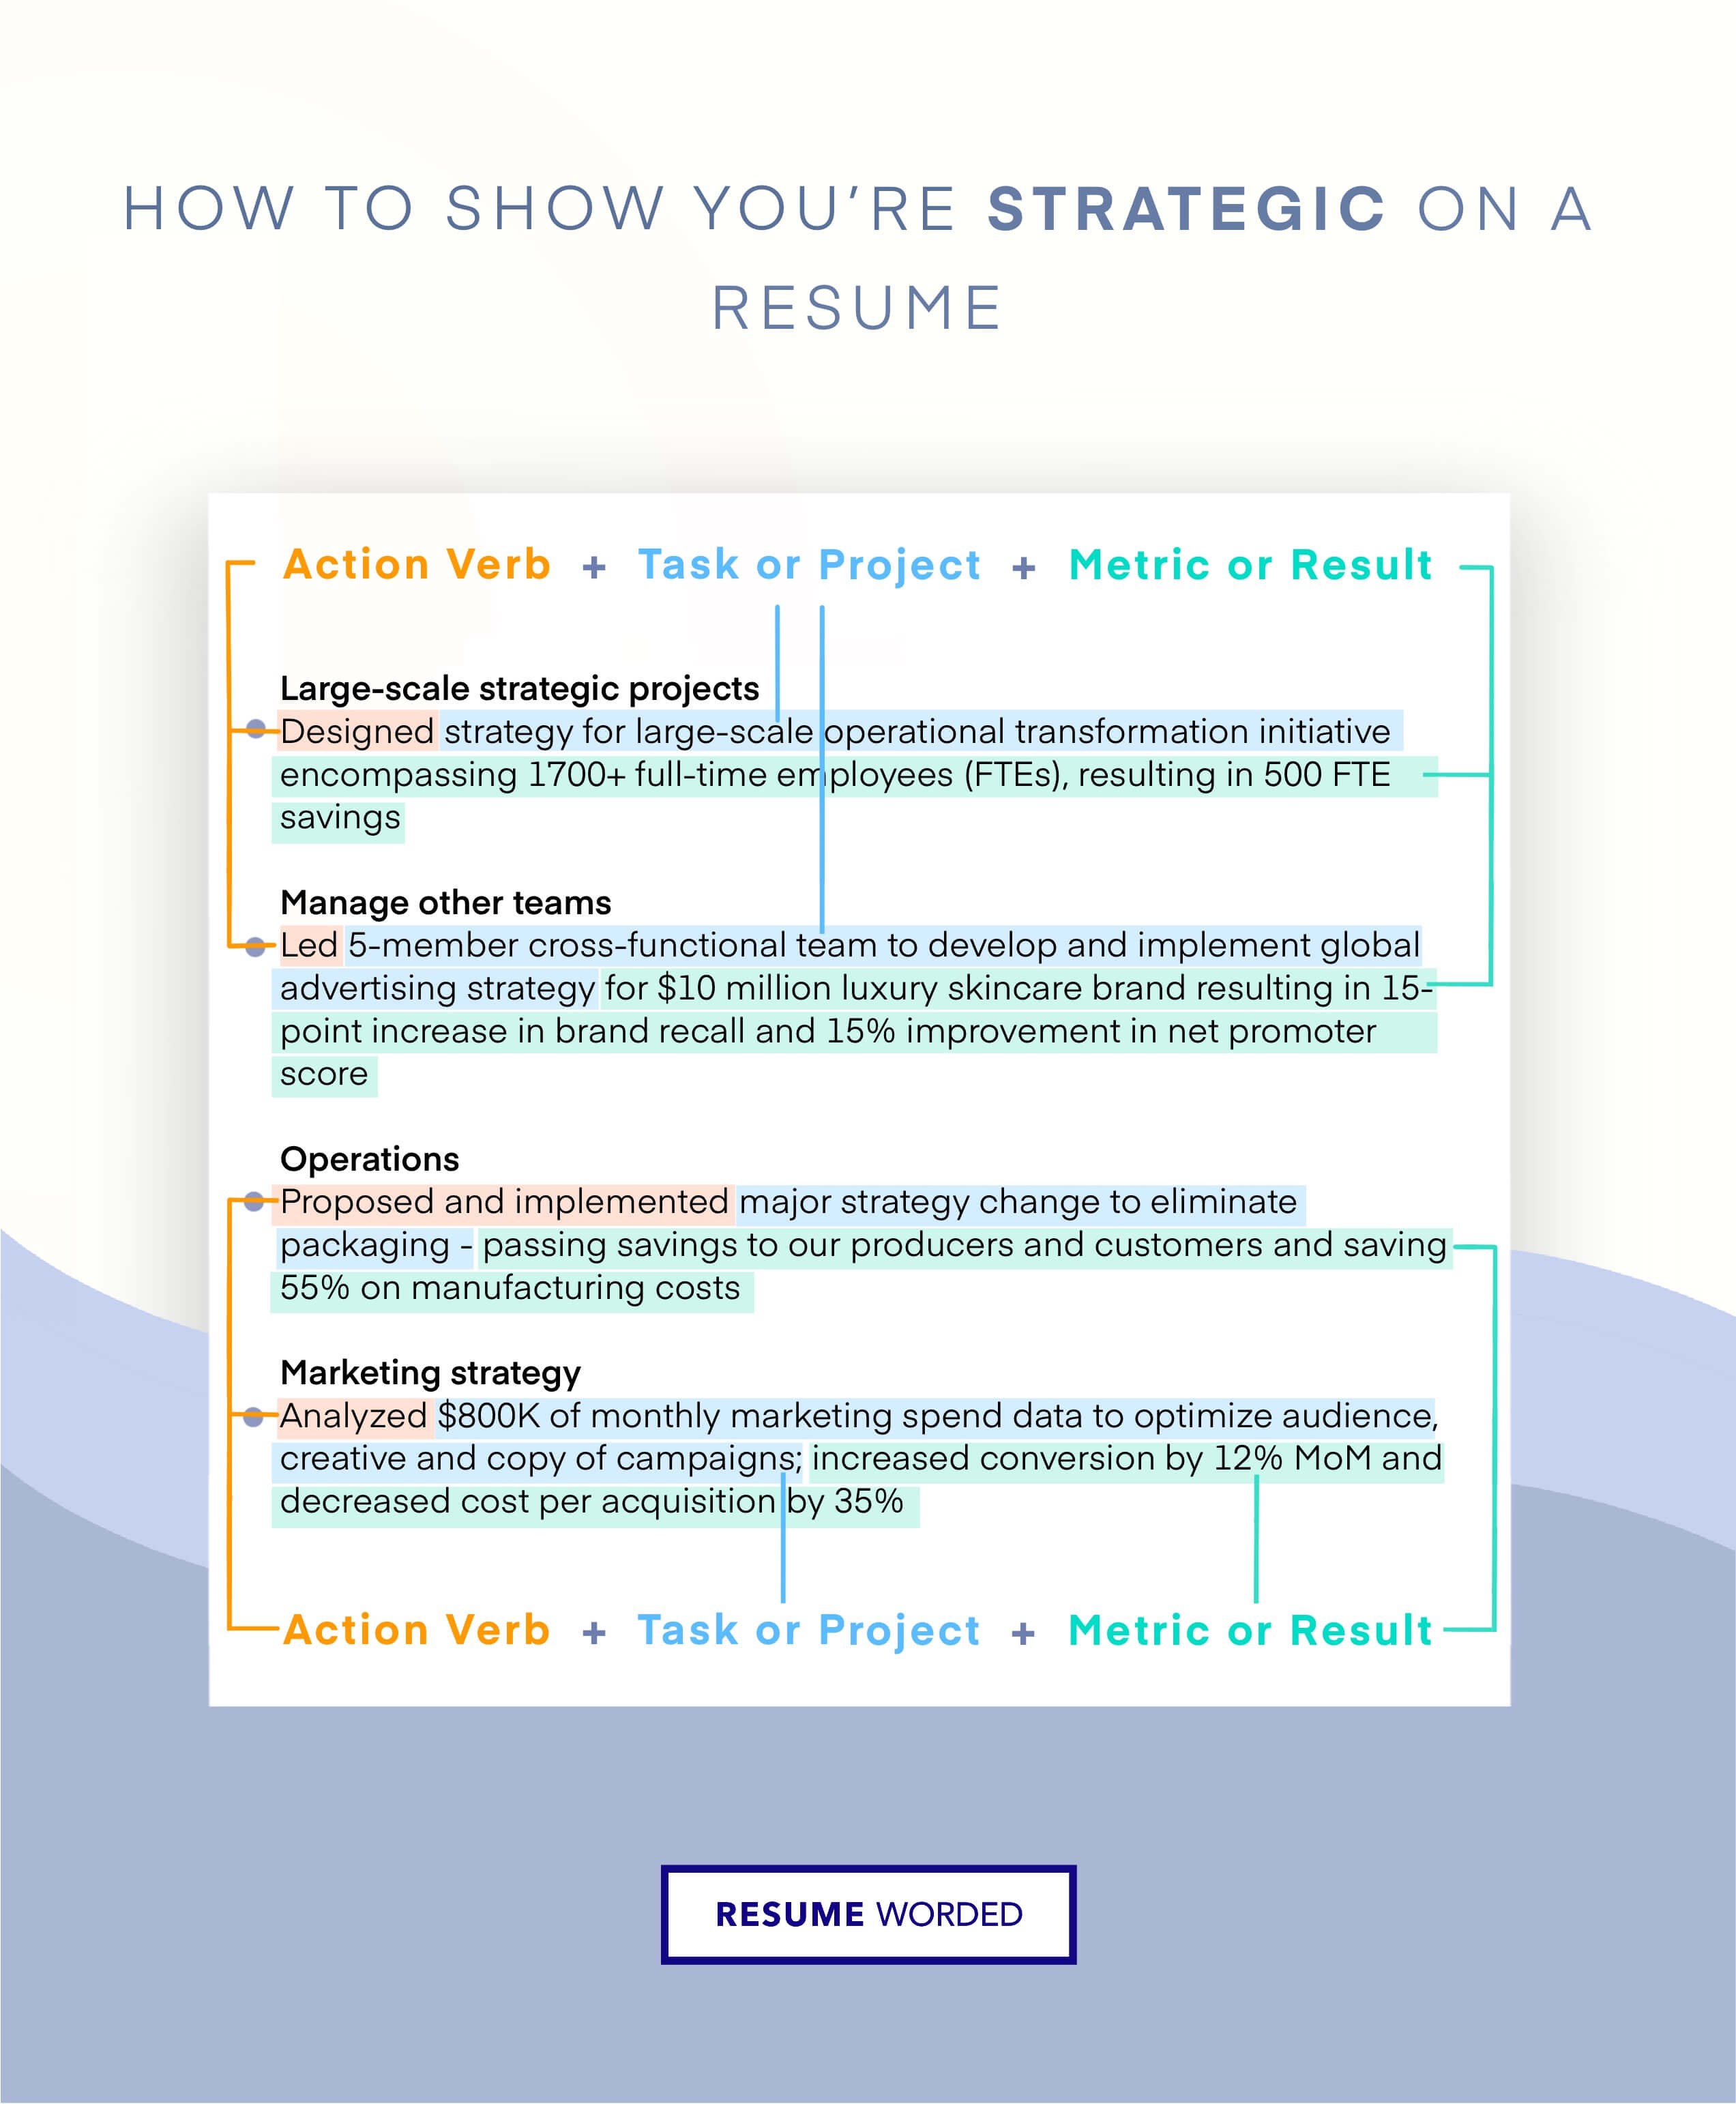 Show evidence of strategic thinking - Chief Operating Officer for Non-Profit CV